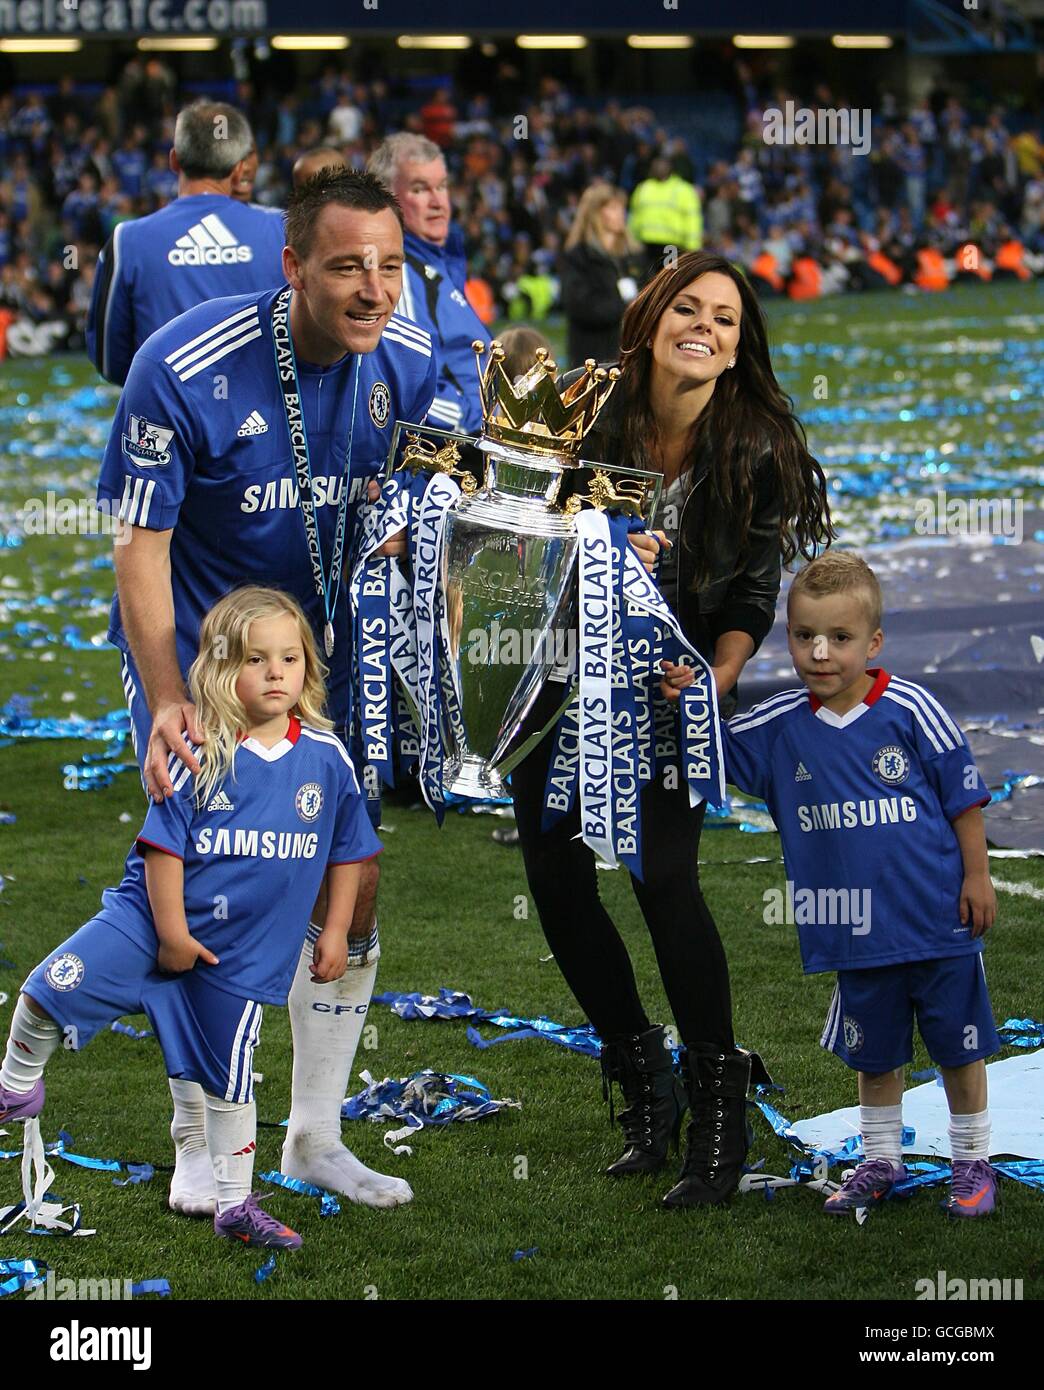 Soccer - Barclays Premier League - Chelsea v Wigan Athletic - Stamford Bridge. Chelsea captain John Terry with wife Toni Poole and their two children celebrate with the Premier League trophy Stock Photo